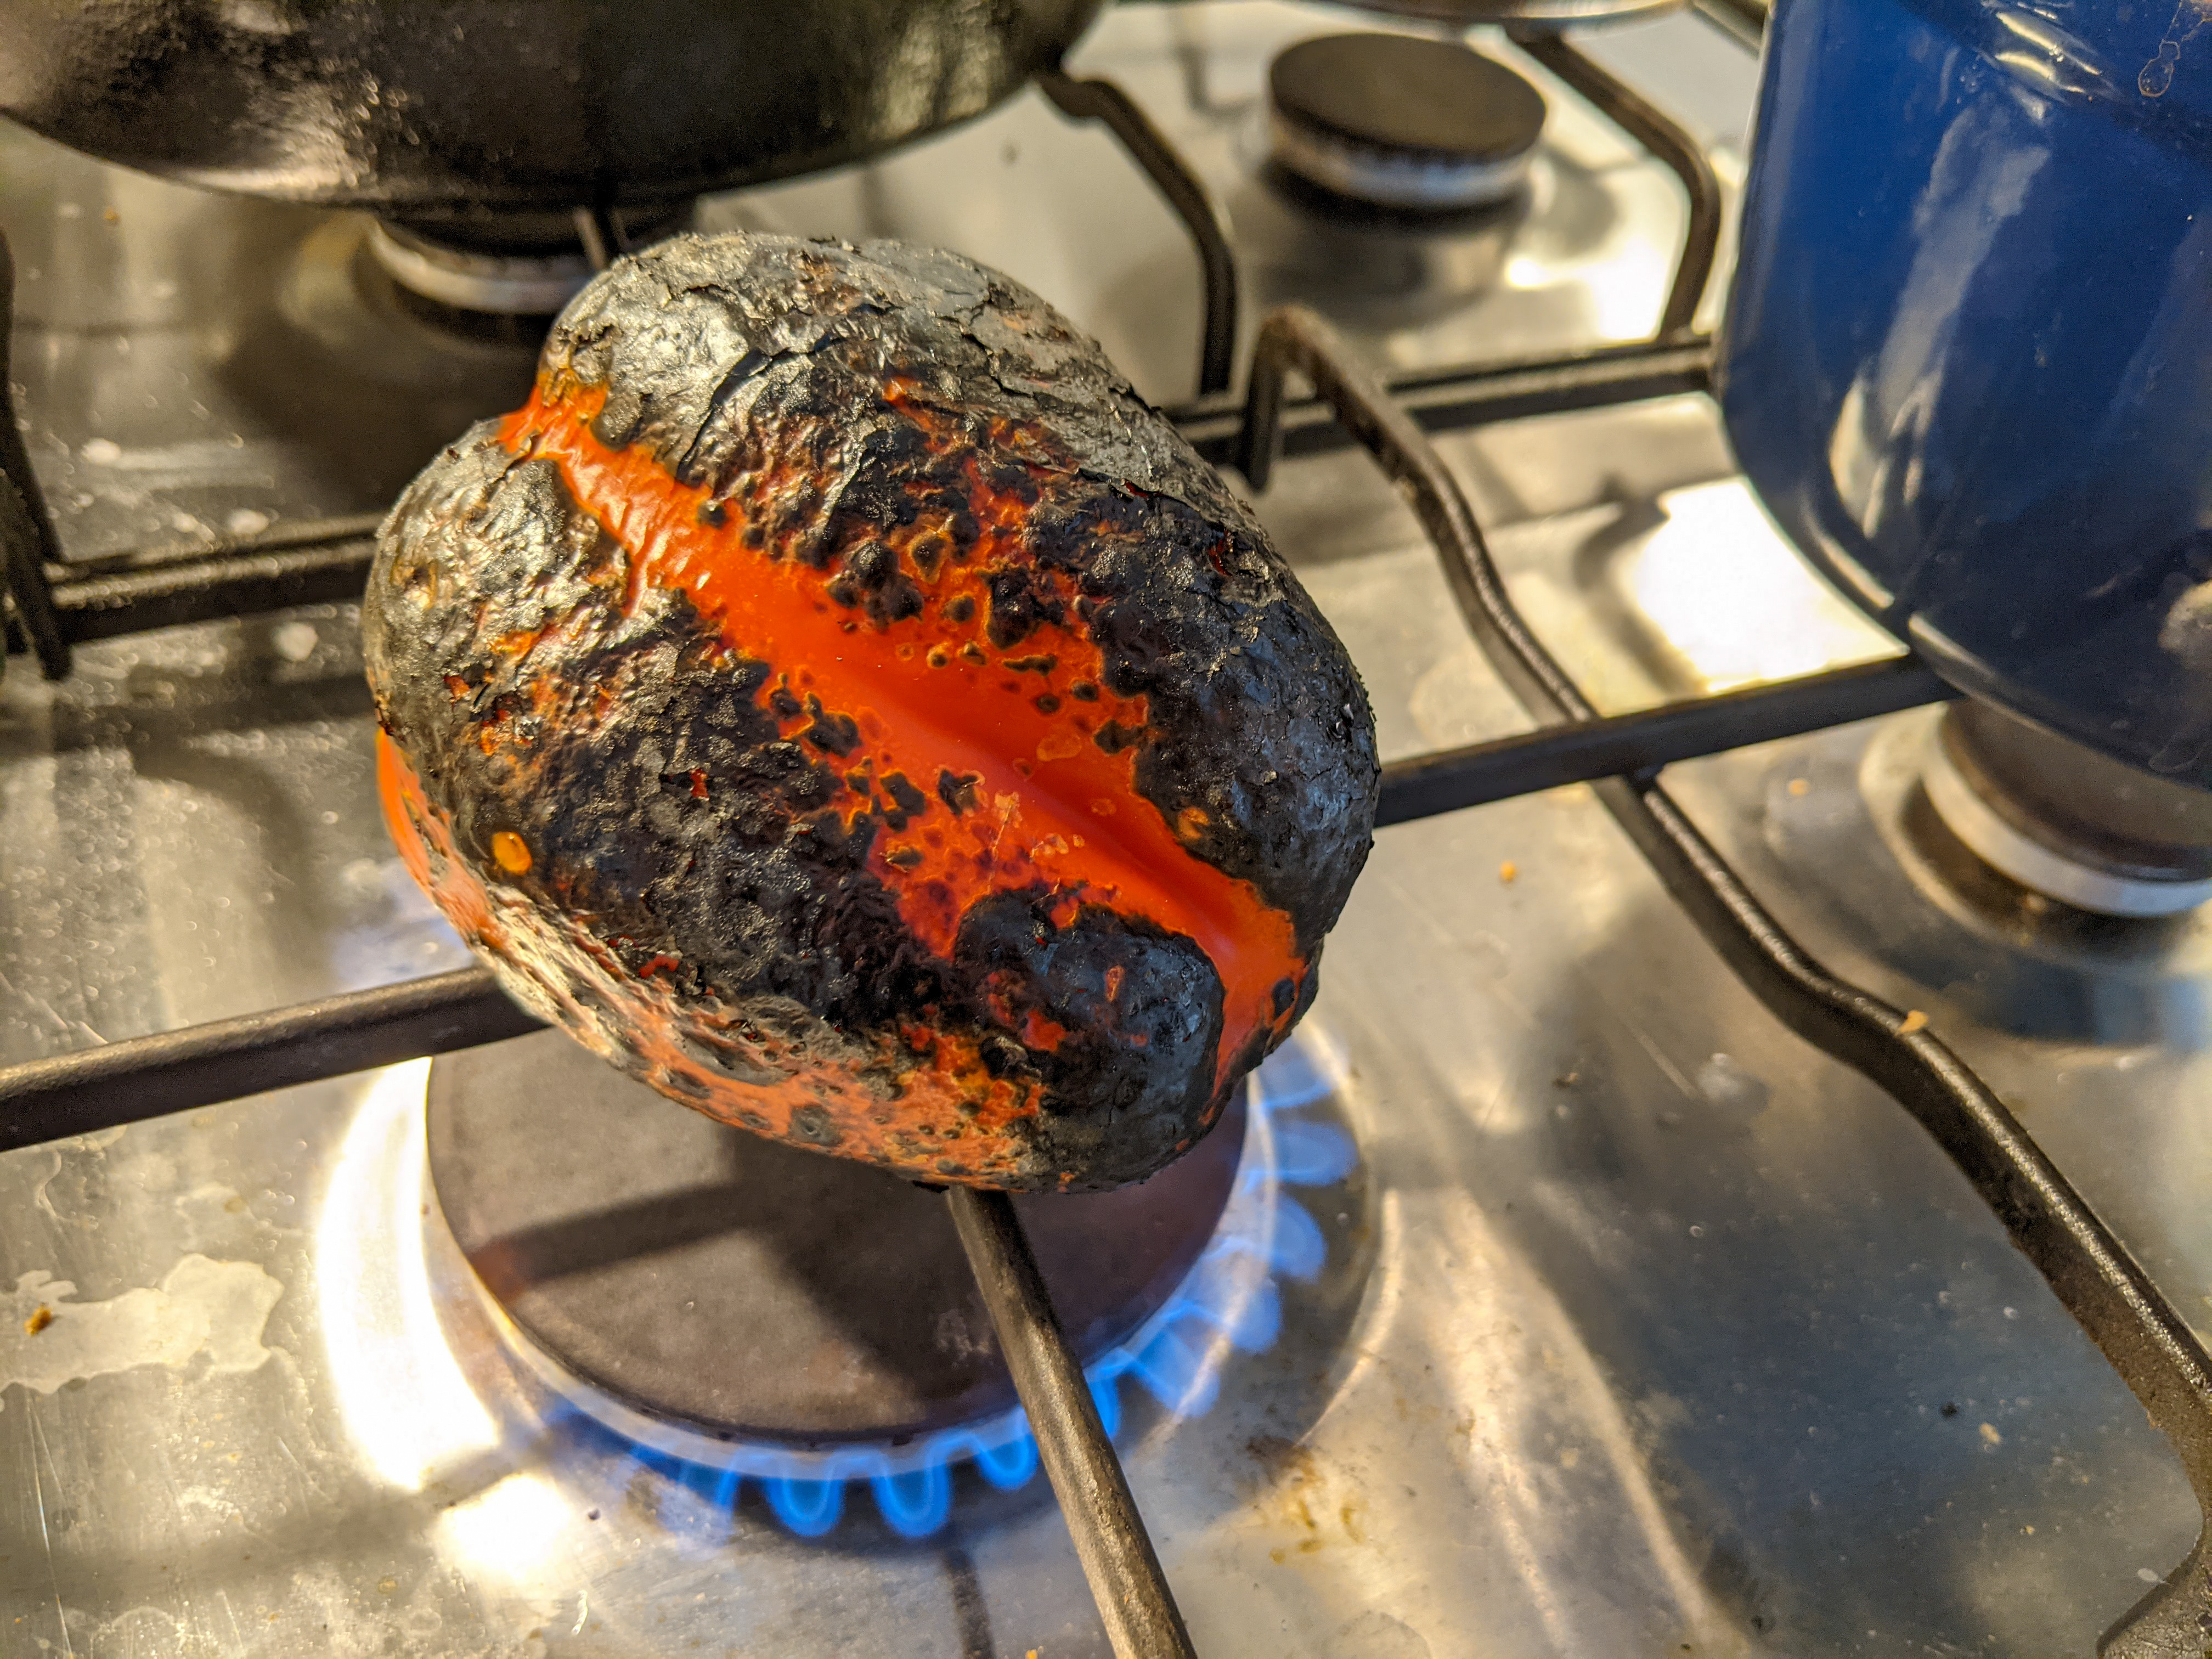 A red pepper sitting on the lit burner of a gas stove. It has significant blackening on the surface